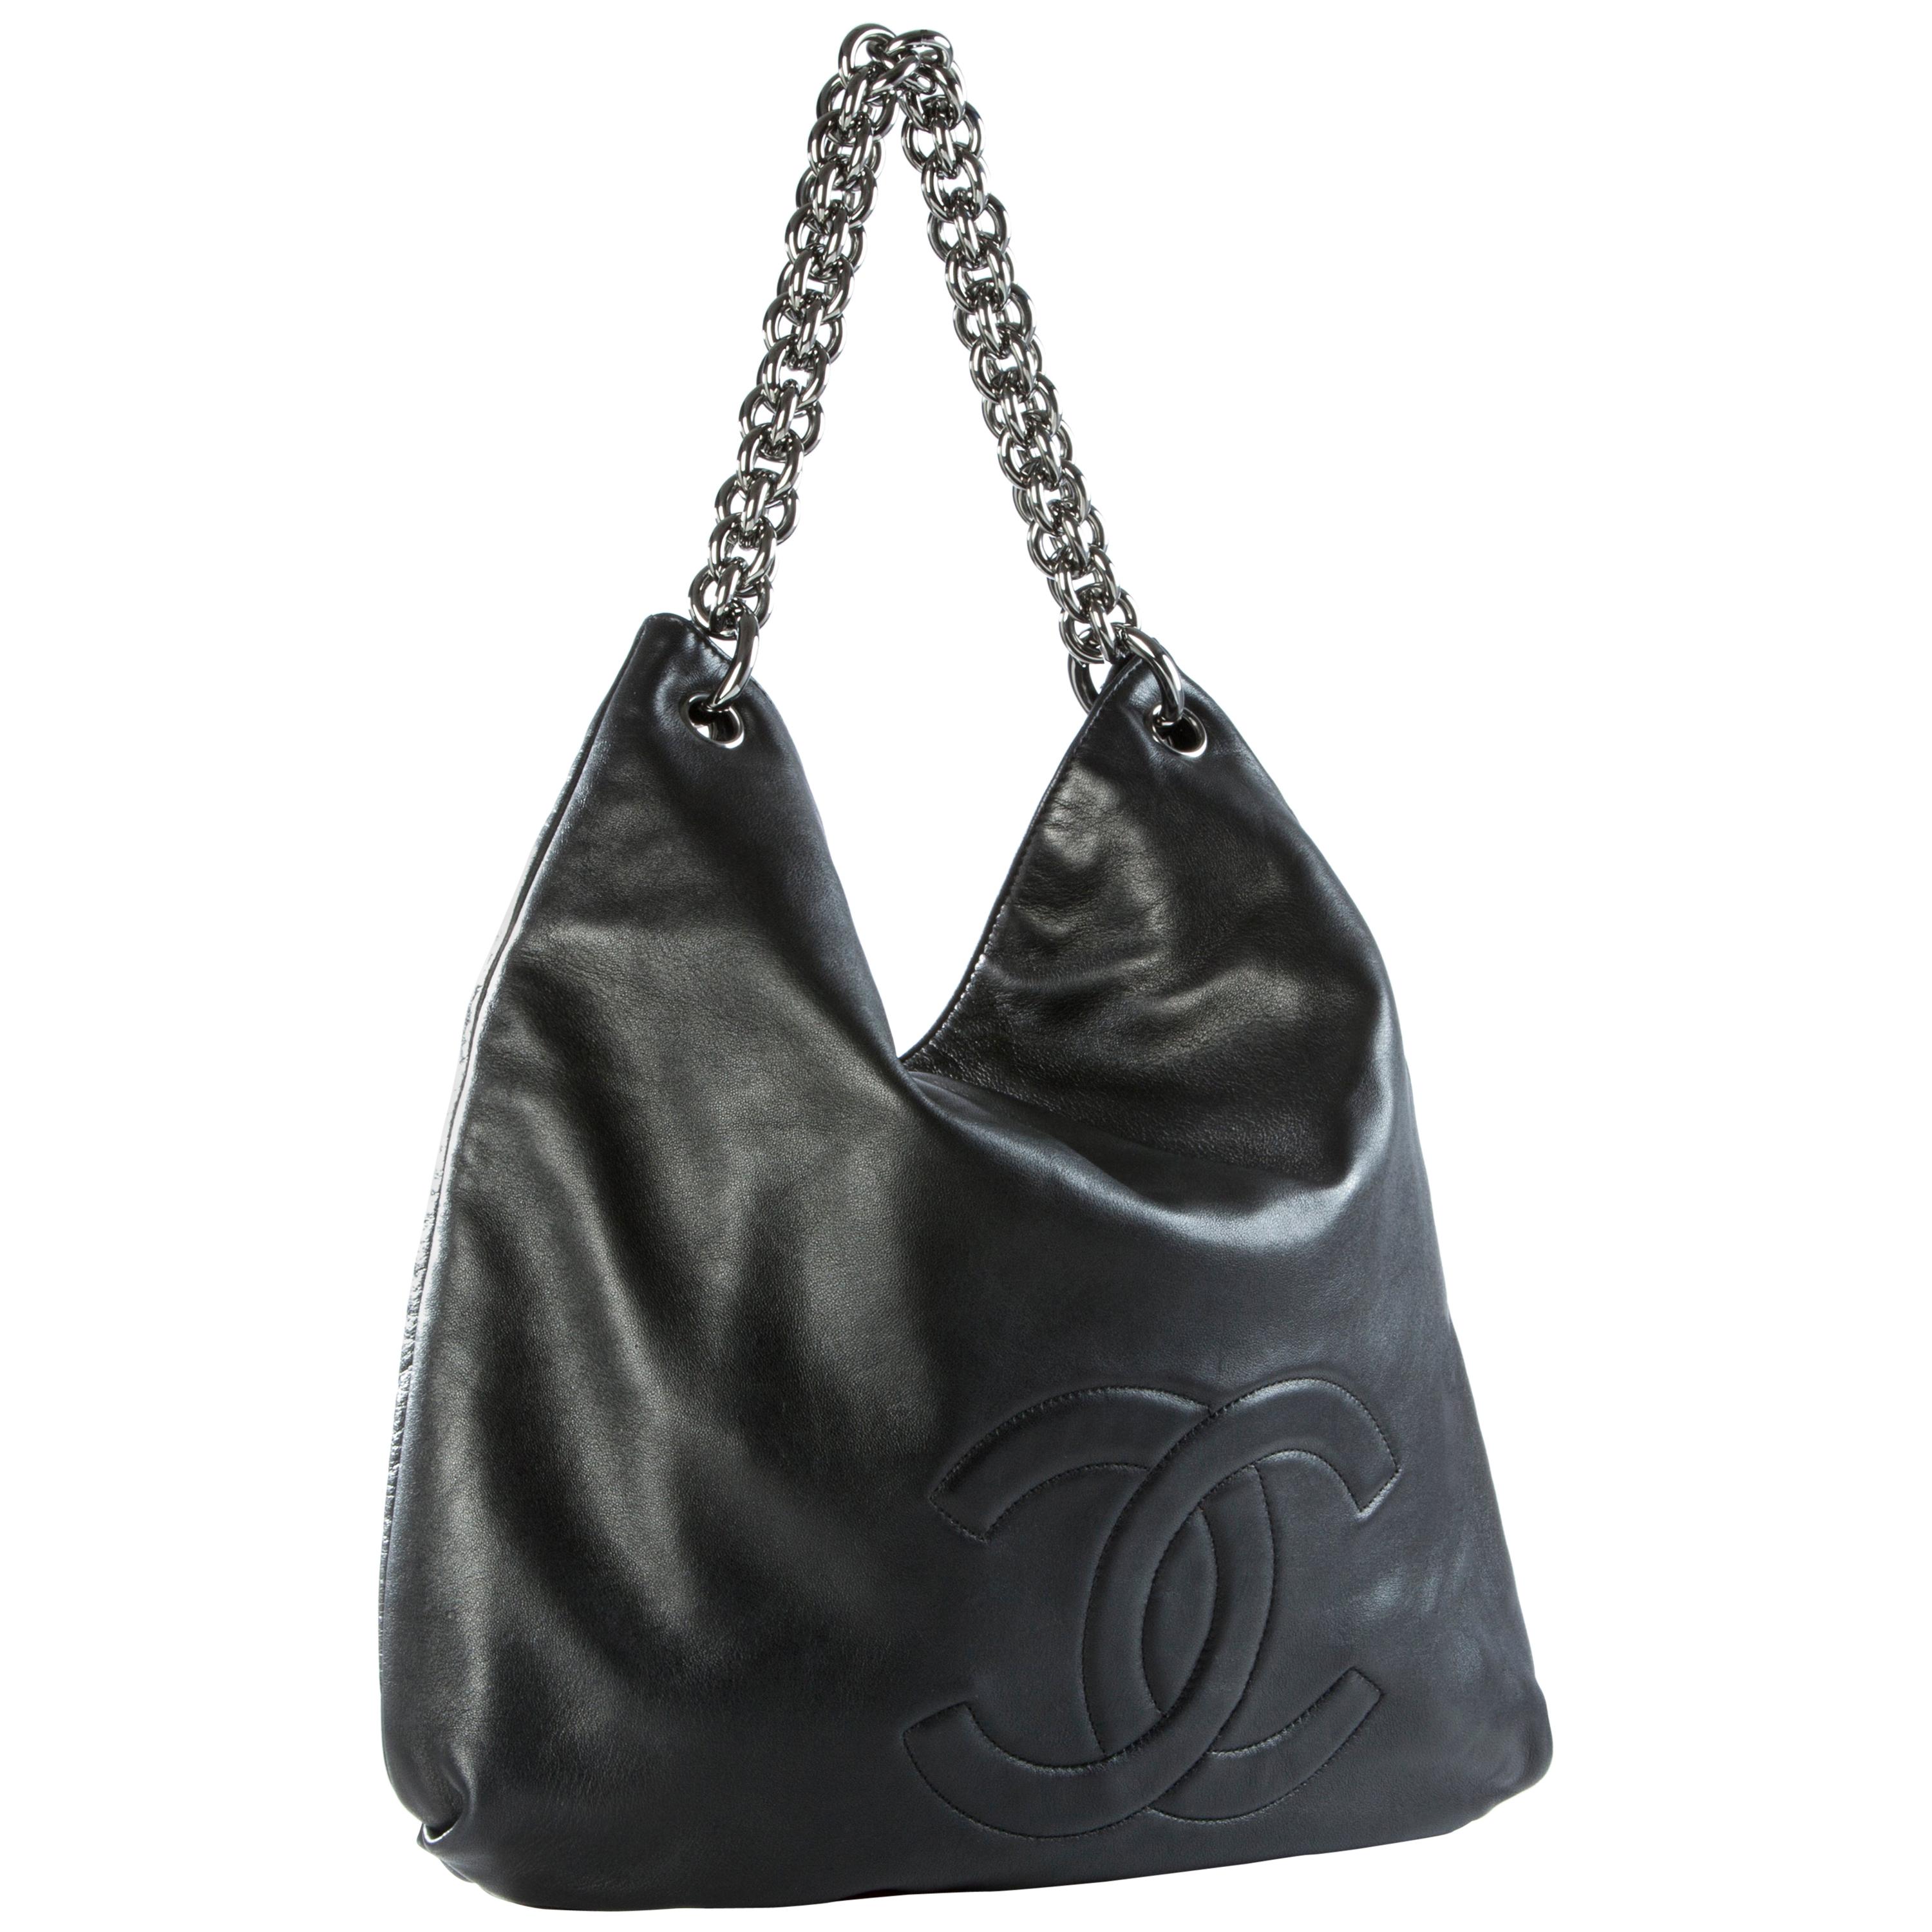 Chanel Large Thick Chain Lambskin Leather Shoulder Bag Tote VIntage